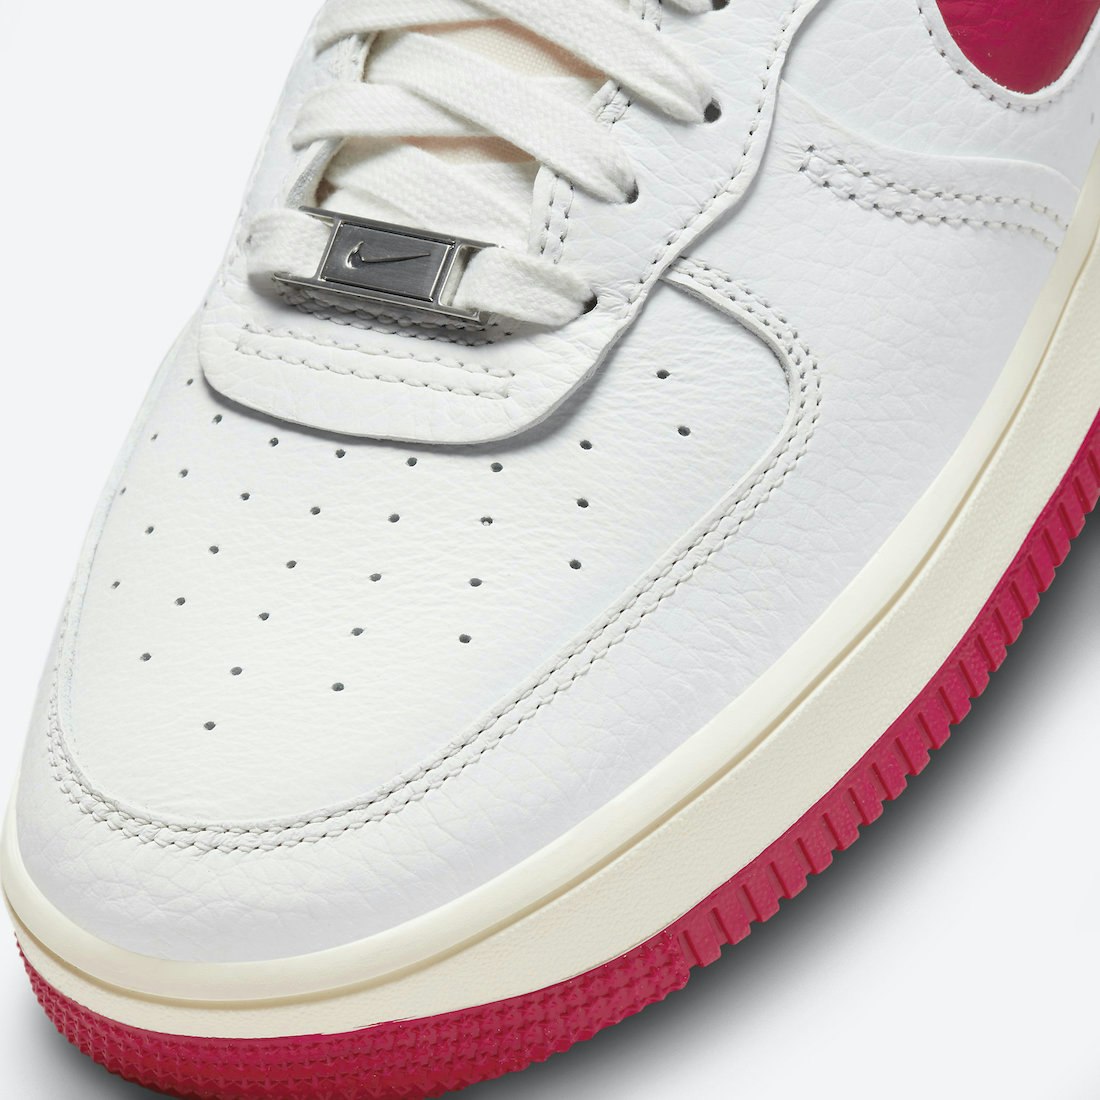 Nike Air Force 1 Strapless “Gym Red”